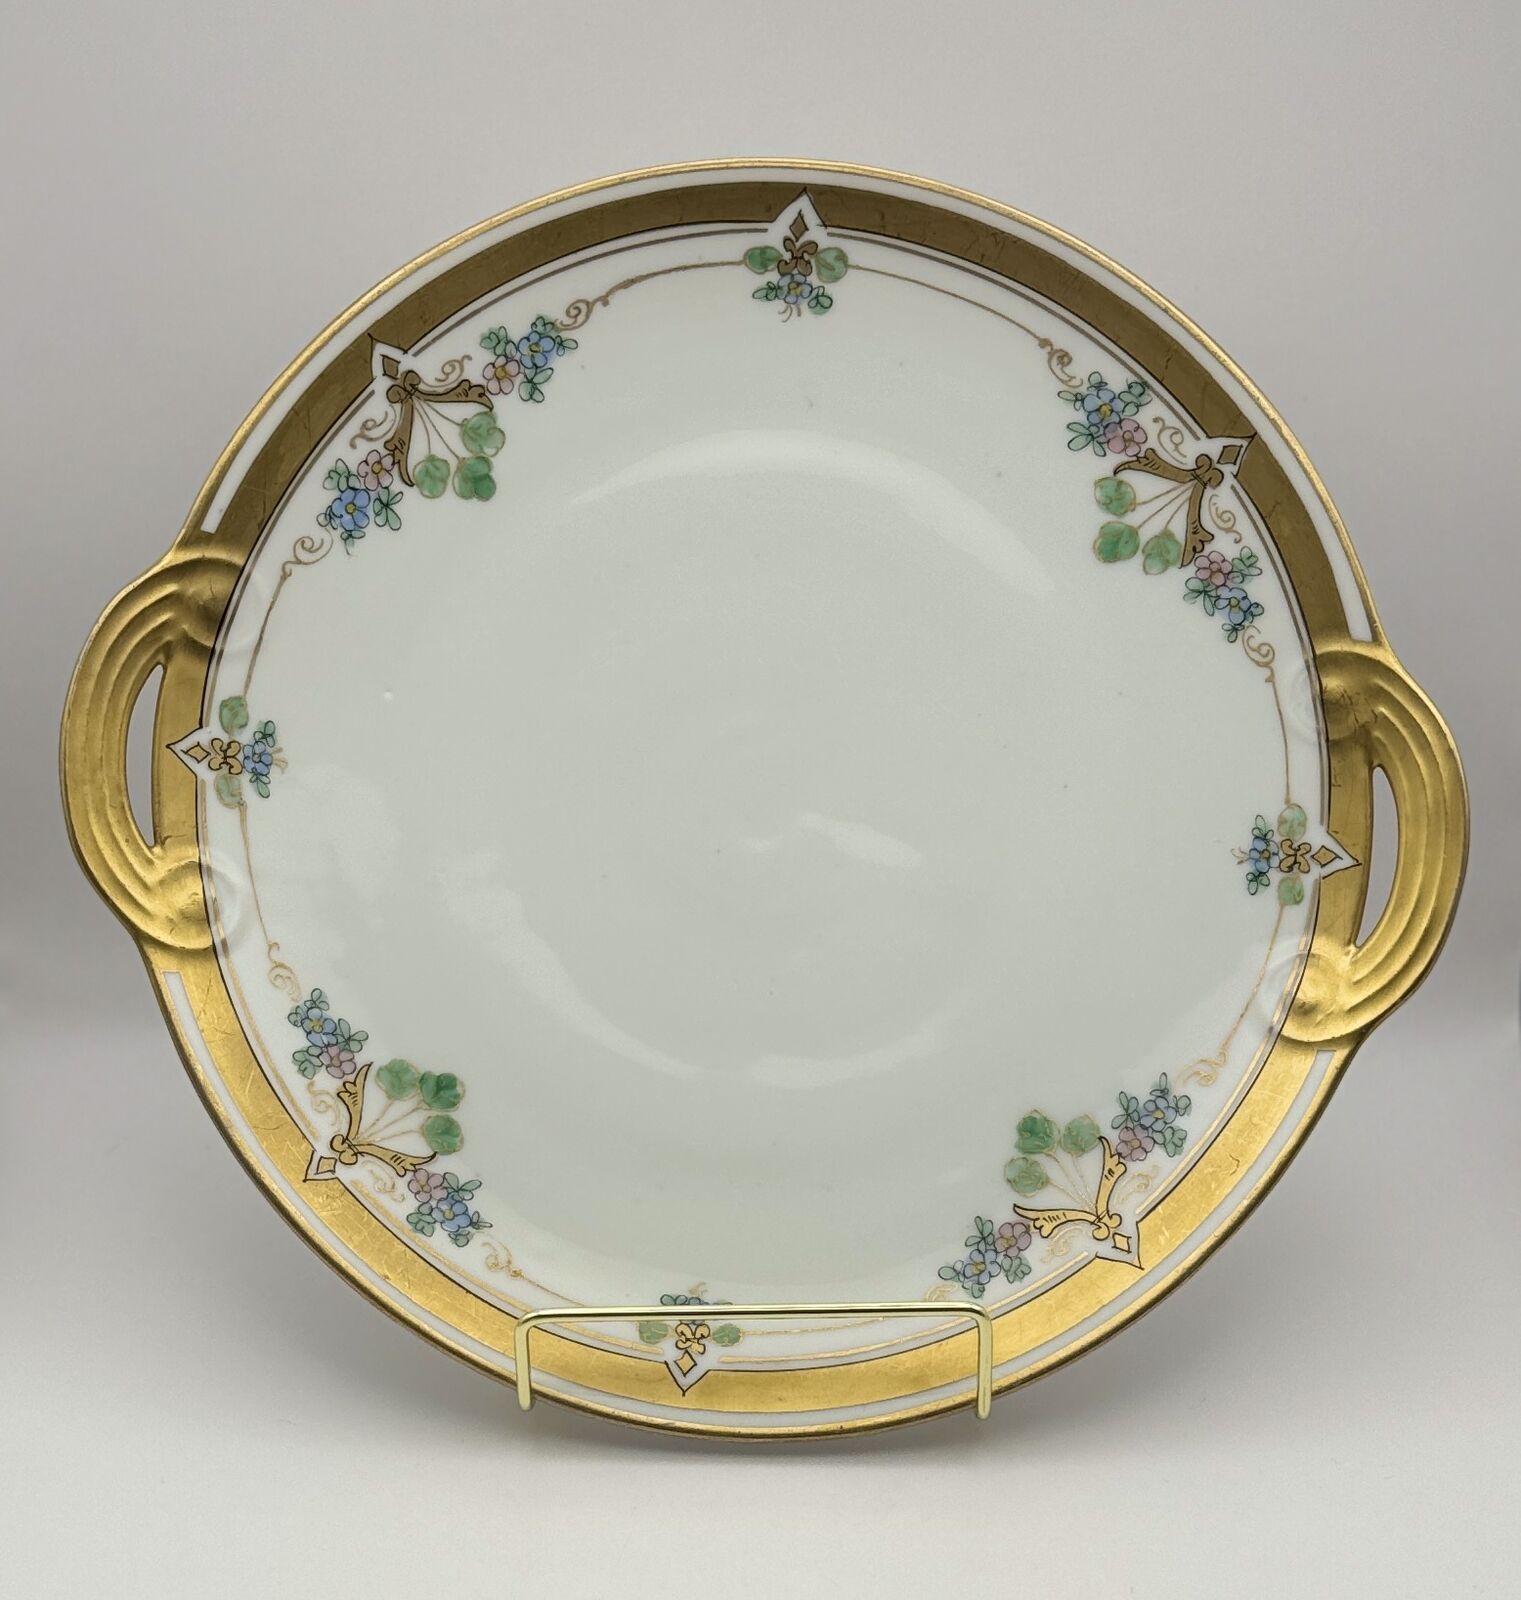 Stunning Noritake Nippon Hand-Painted Floral & Gold Cake Plate